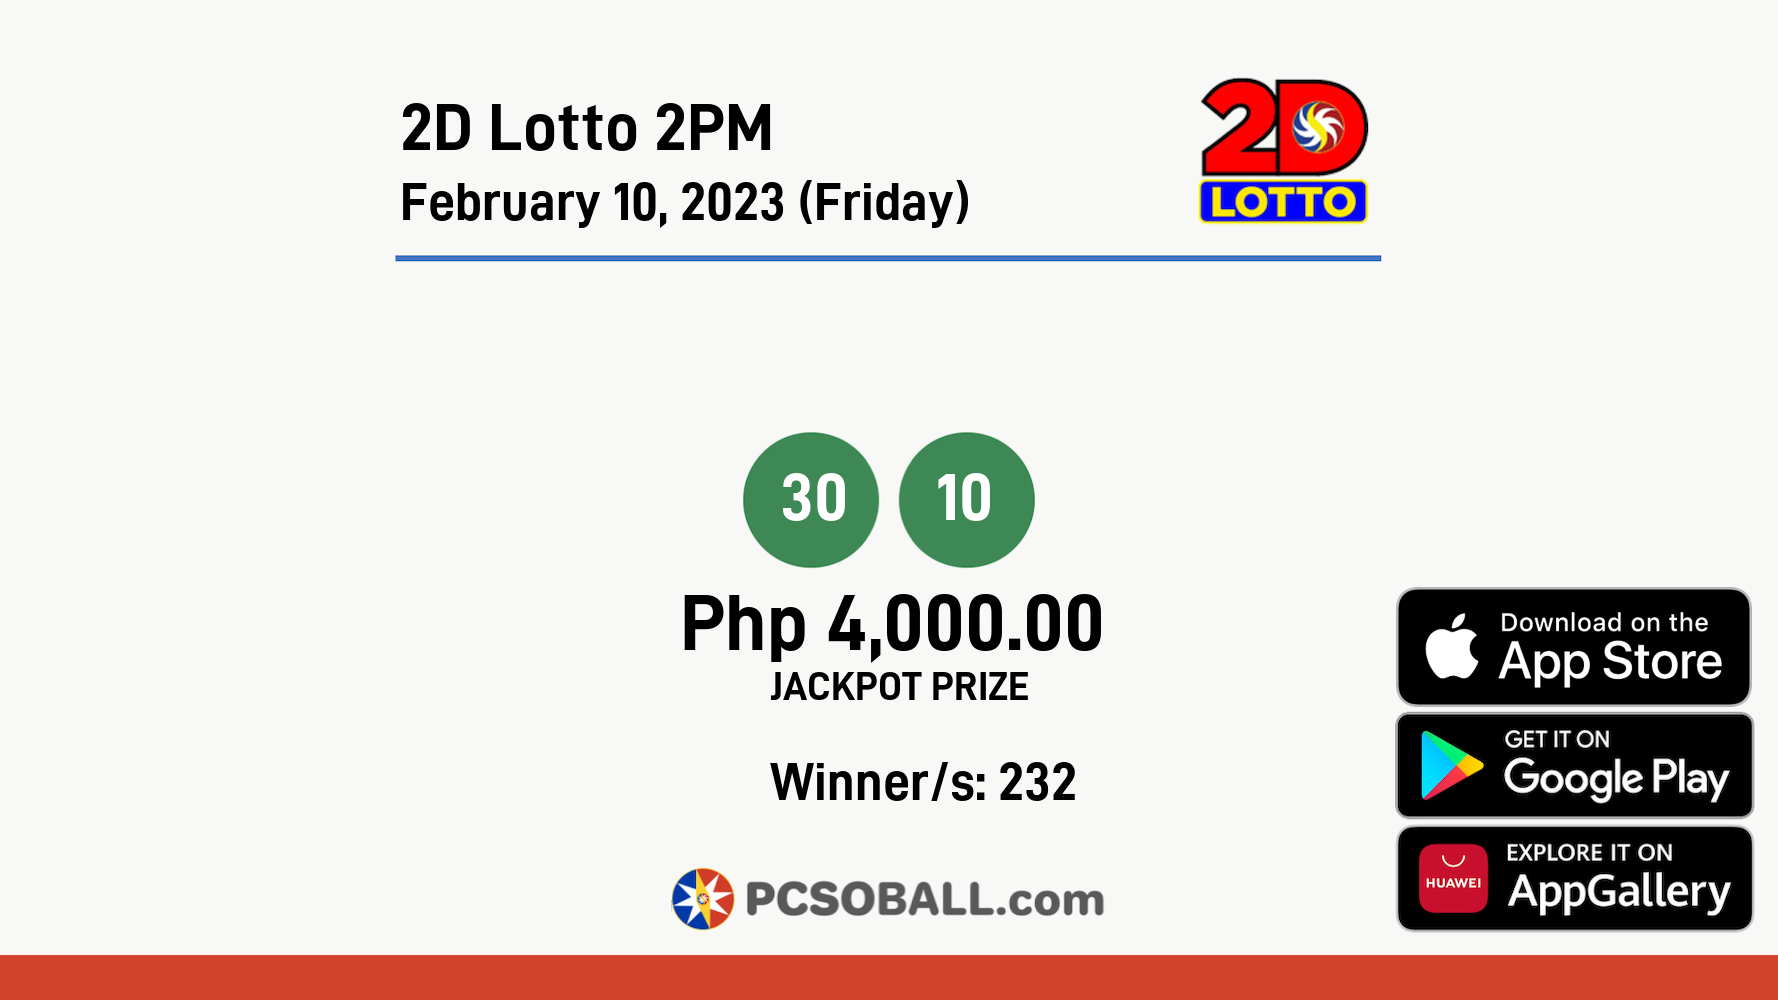 2D Lotto 2PM February 10, 2023 (Friday) Result